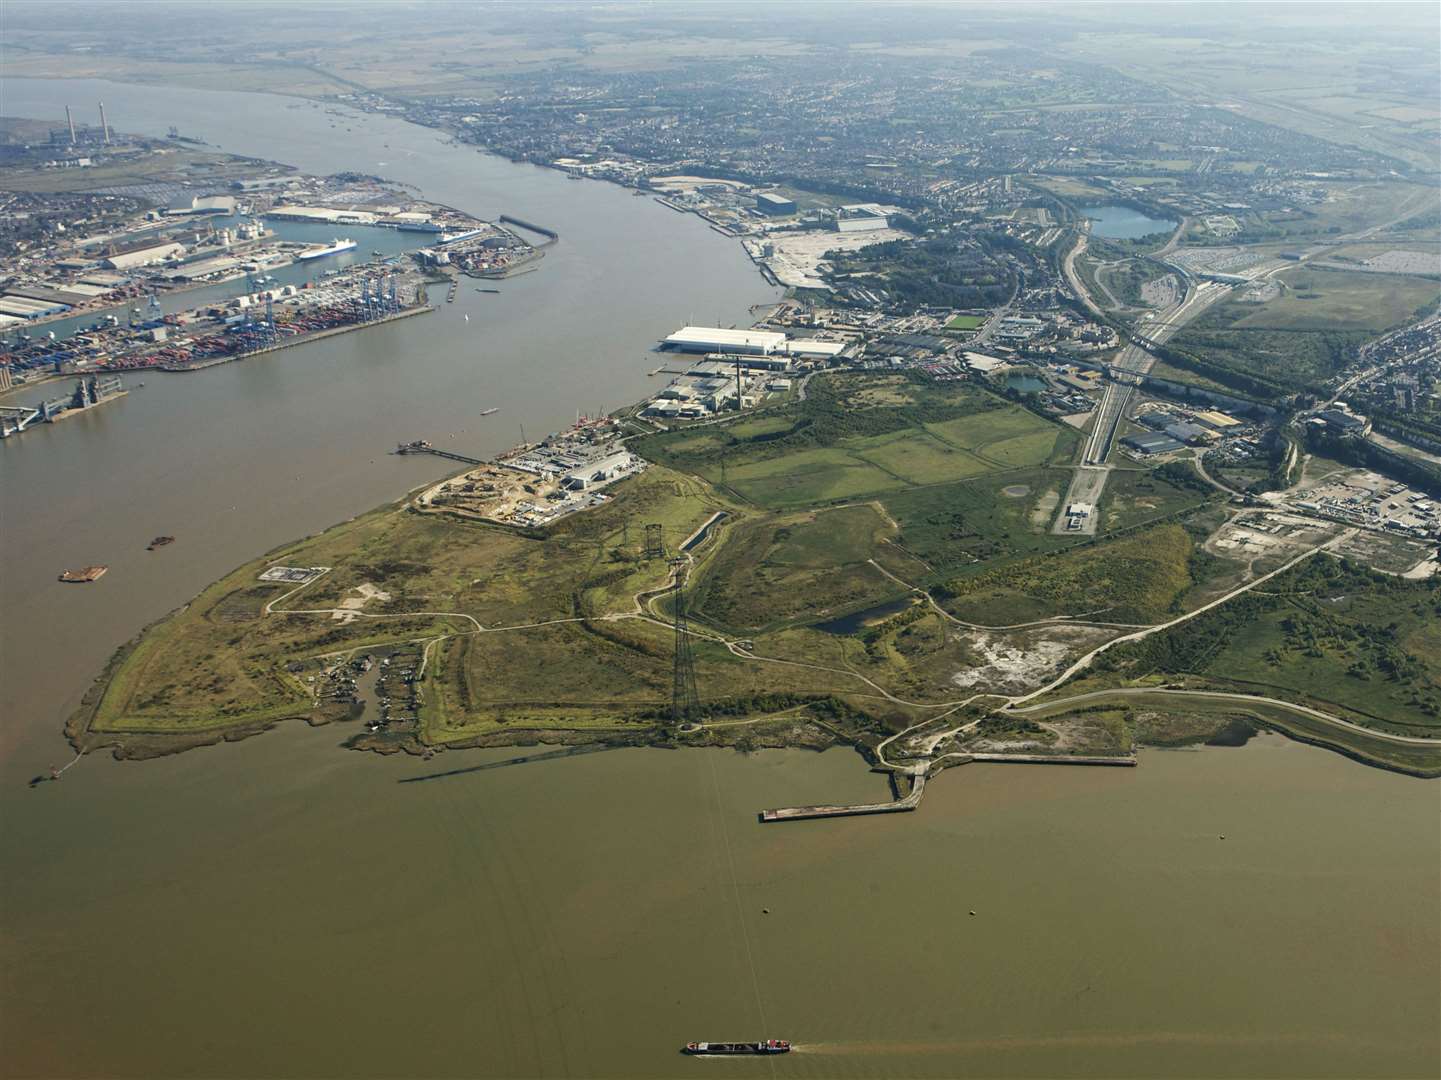 The London Resort is set to be built on the Swanscombe Peninsula. Picture: EDF Energy